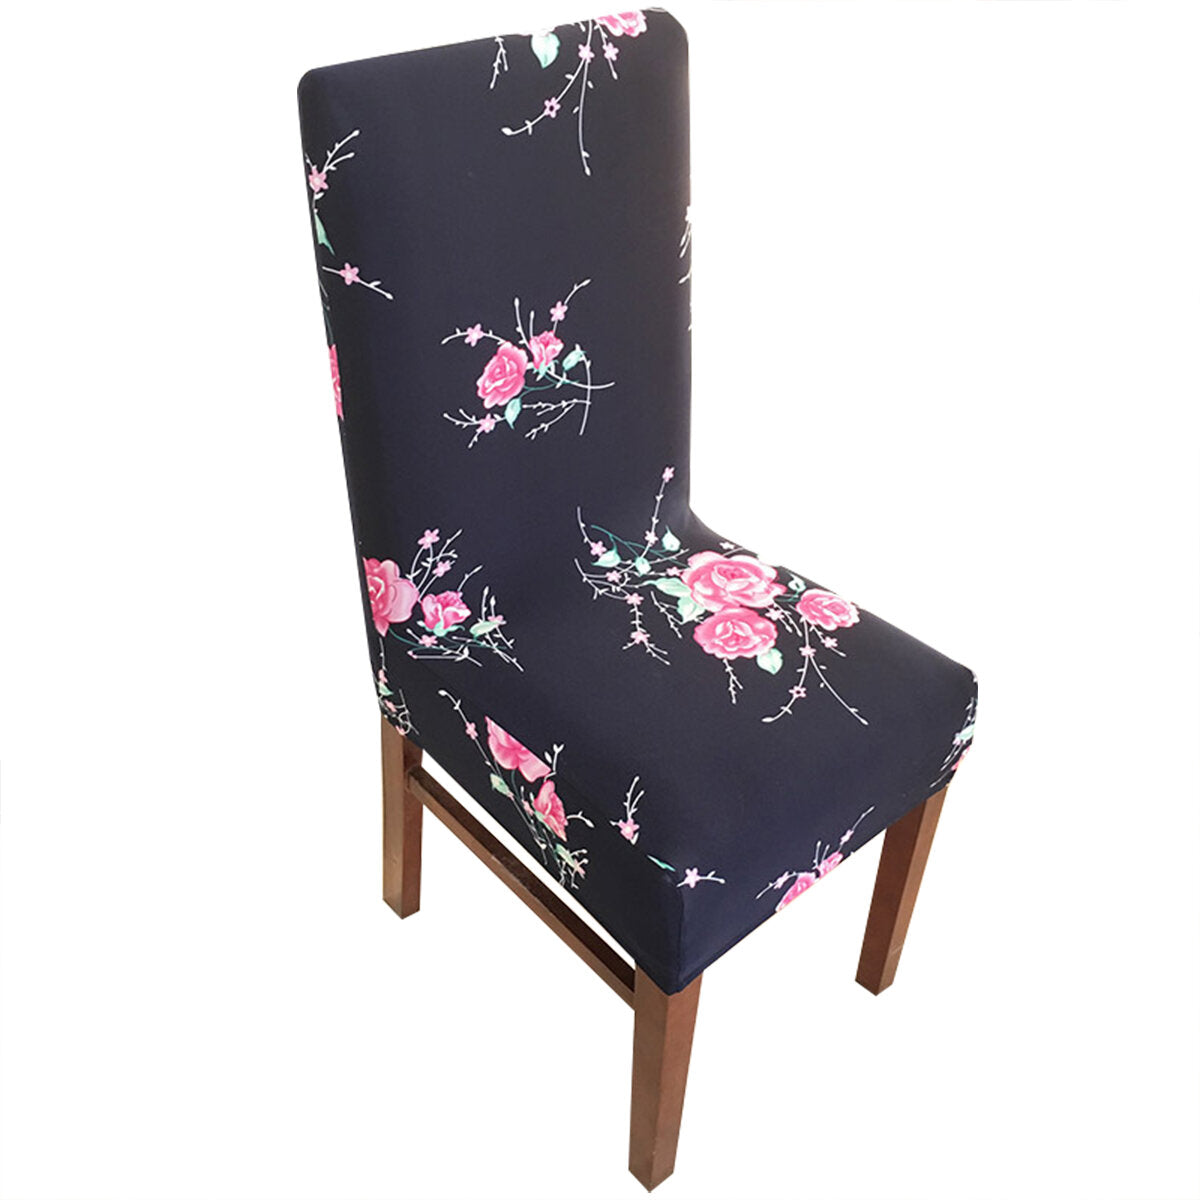 Dining Chair Cover Elastic Removable Chair Seat Protector Stretch Slipcover For Dining Room Wedding Banquet Party Hotel Kitchen Home Office Decor